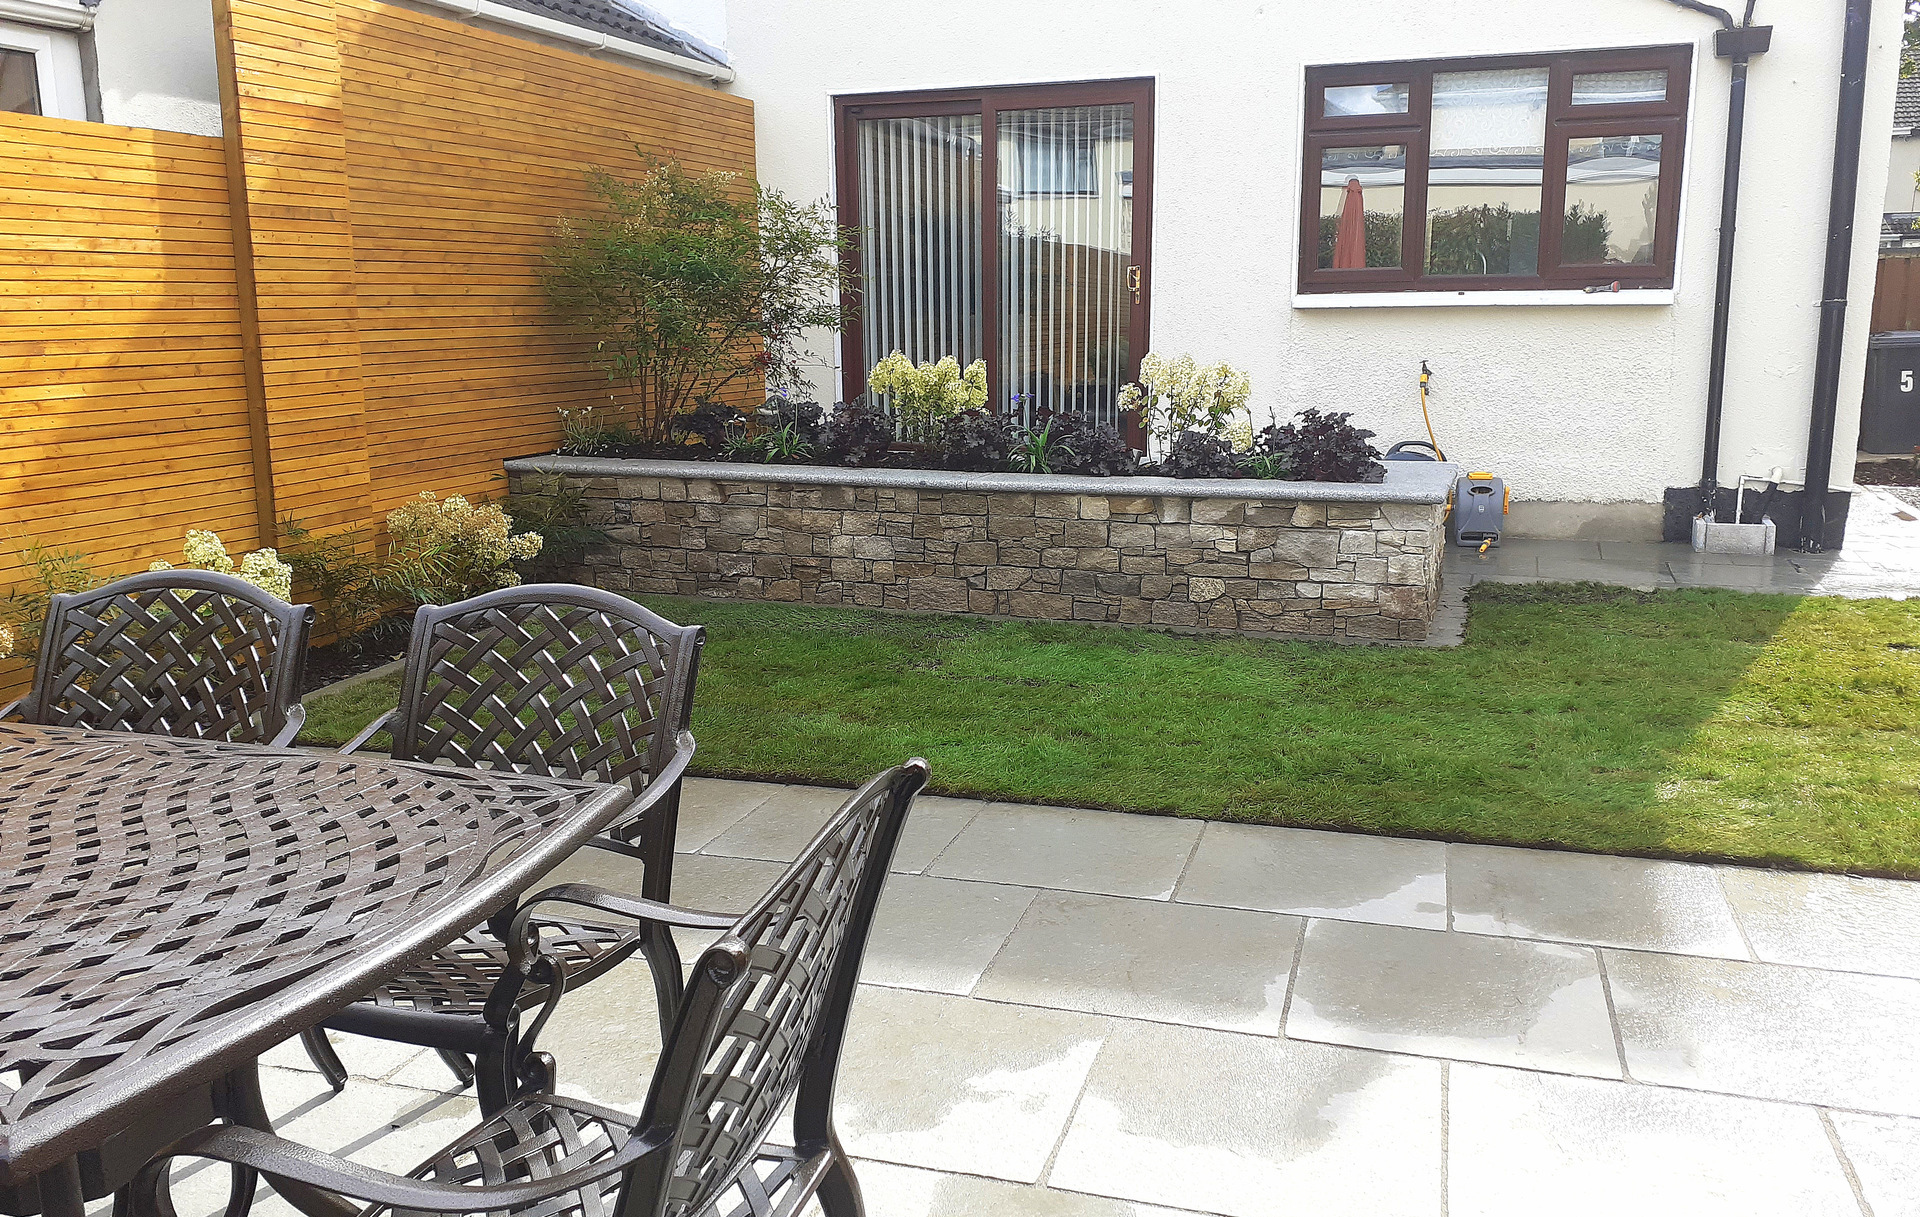 Family Garden Garden Design & Landscaping project in Firhouse, Dublin 24 featuring limestone patios, custom made horizontal slatted fencing, raised planter beds in natural stone, lush low maintenance planting & split level patios.